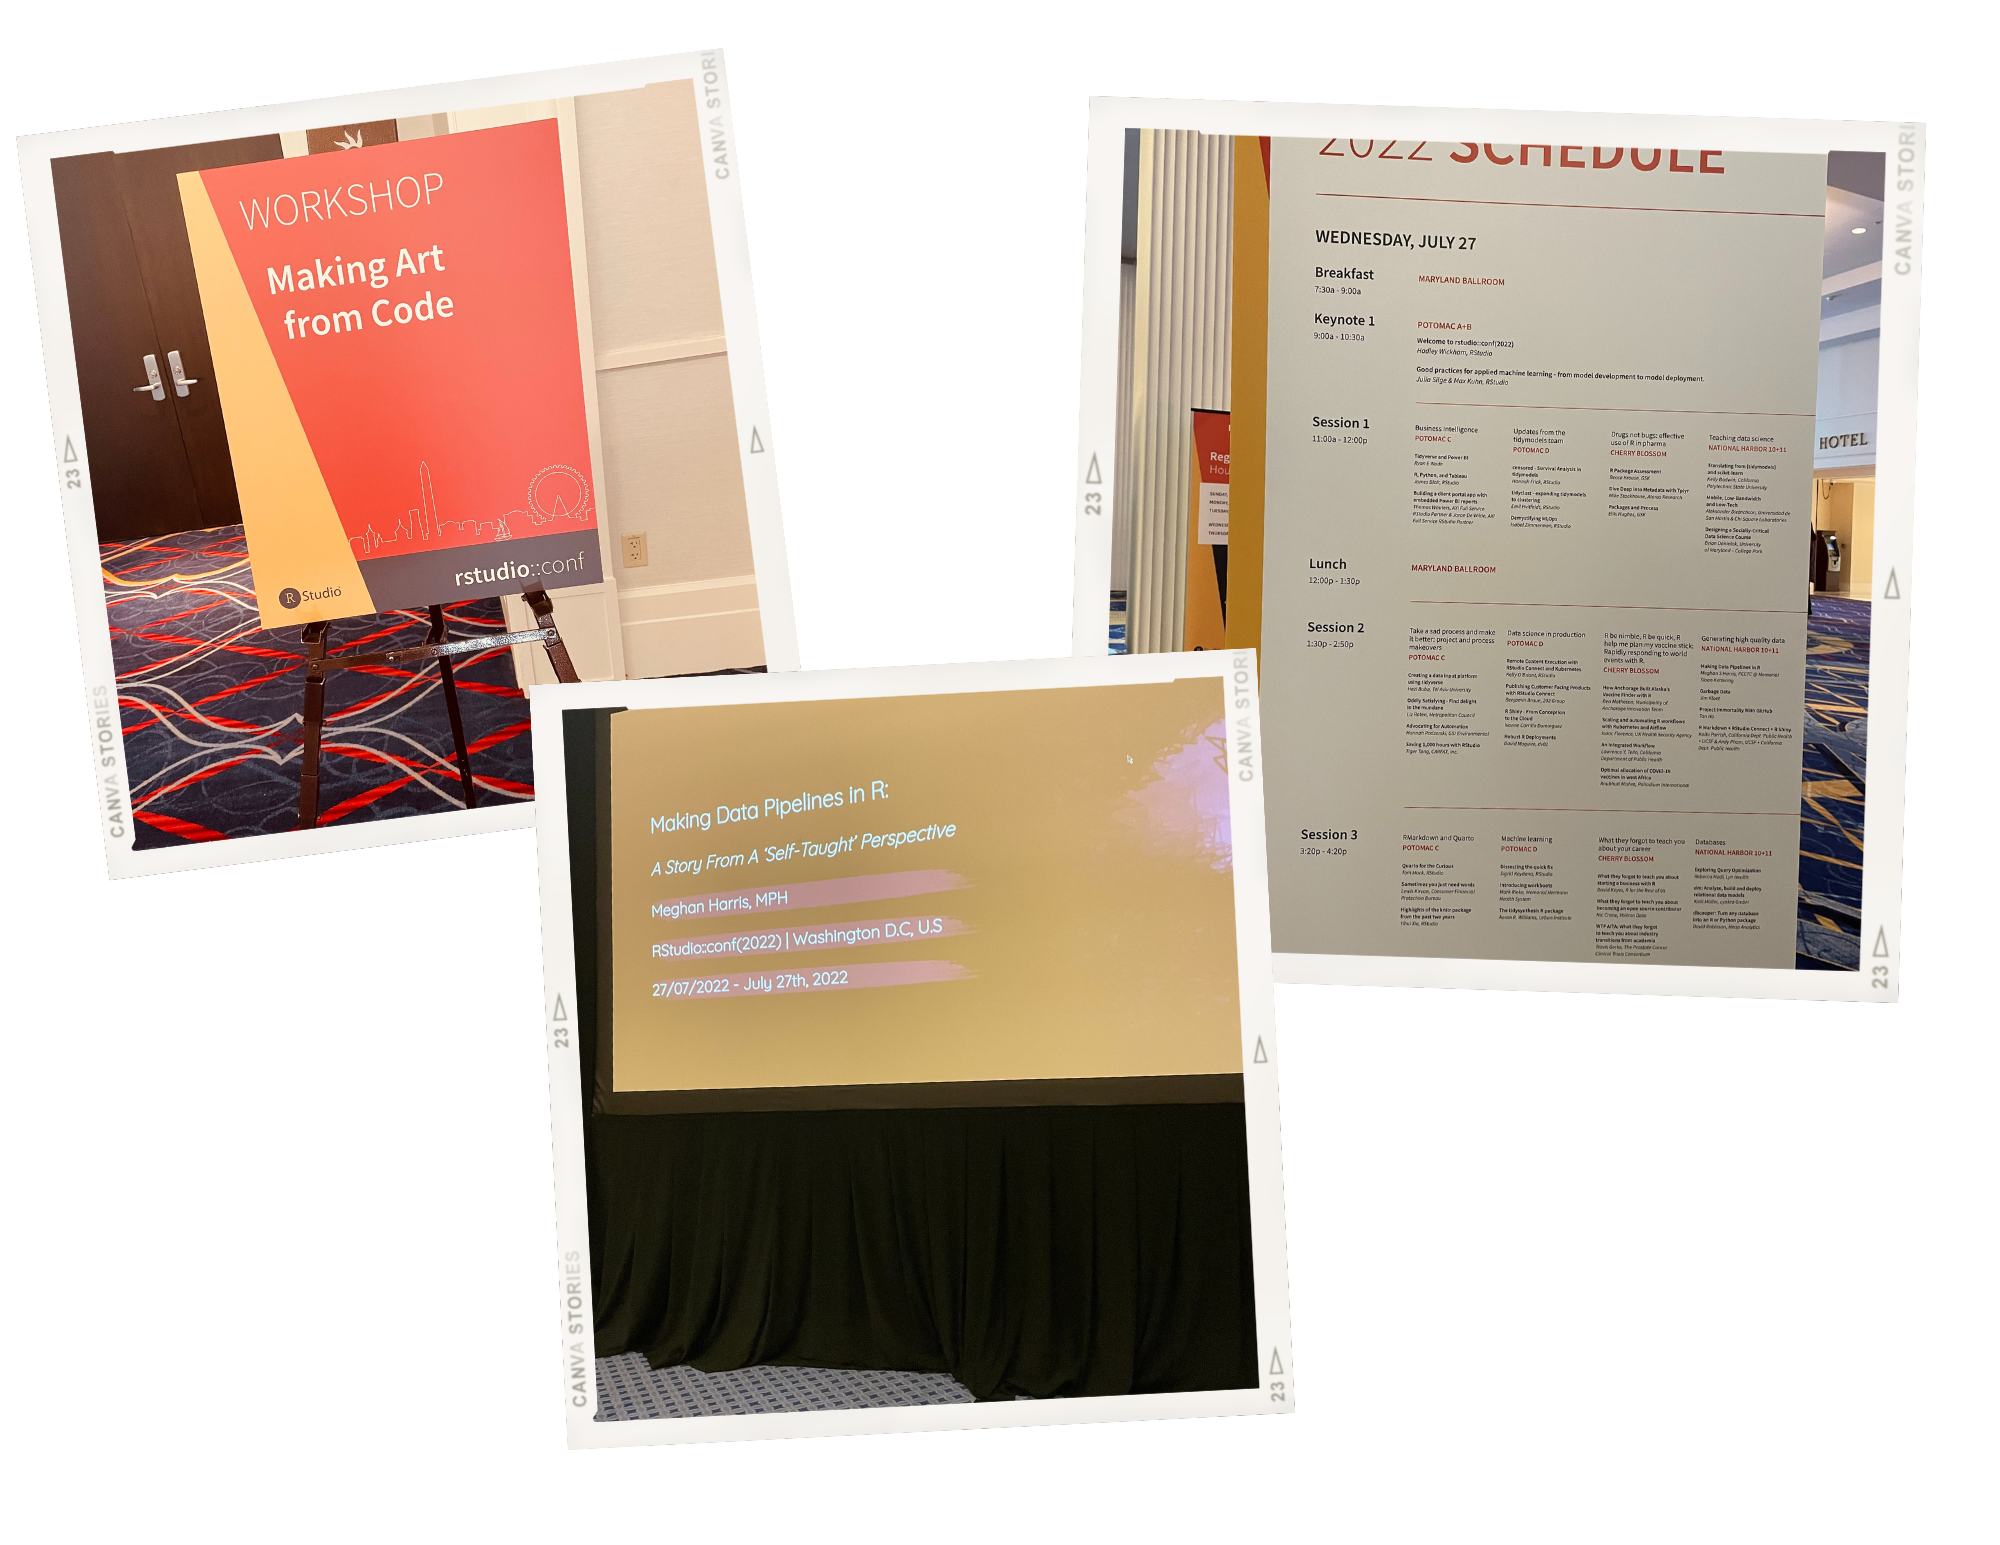 Three pictures I took at RStudio conf 2022. An Orange entry sign of a Workshop title Making Art from Code, a 2022 conference schedule, and the title screen of my conference presentation, Making Data Pipelines in R.